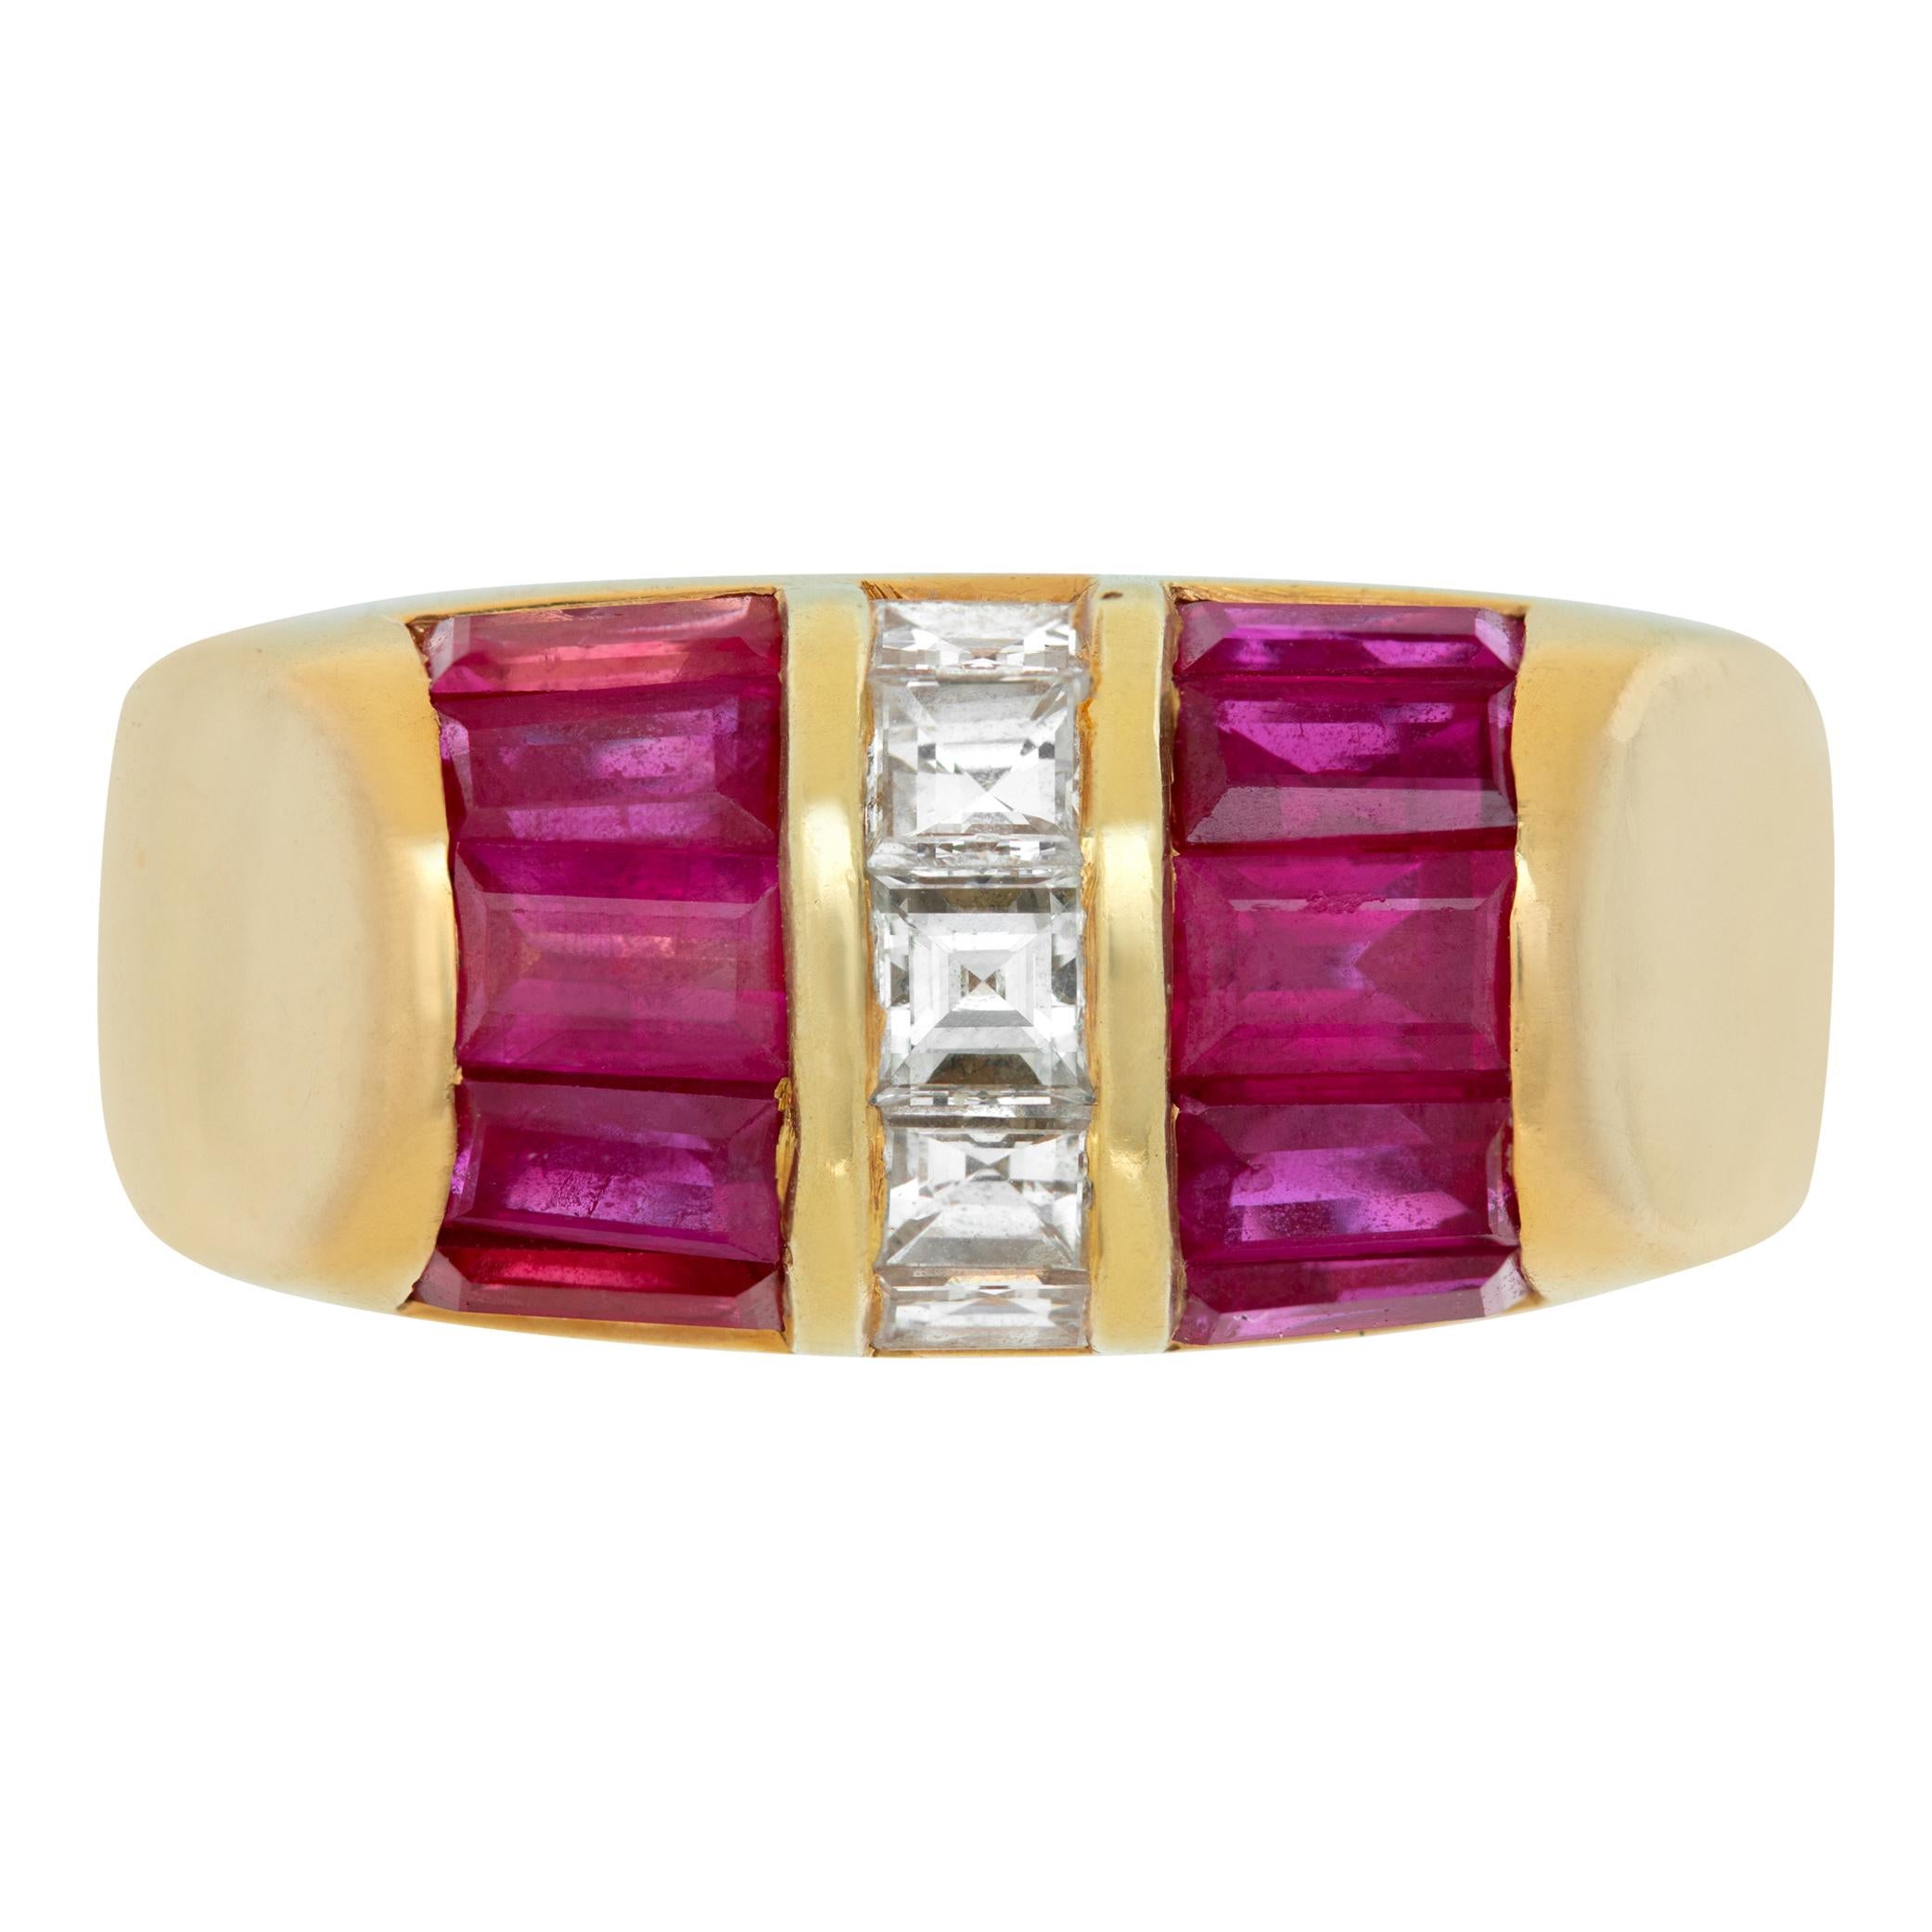 Vintage Bvlgari ruby & diamond ring in 18k yellow gold. 5 emerald cut diamonds (approx. 0.50 carat), F-G color, VVS-VS clarity. 10 baguette rubies (approximately 1.50 carat). Ring size 5.This Bvlgari ring is currently size 5 and some items can be